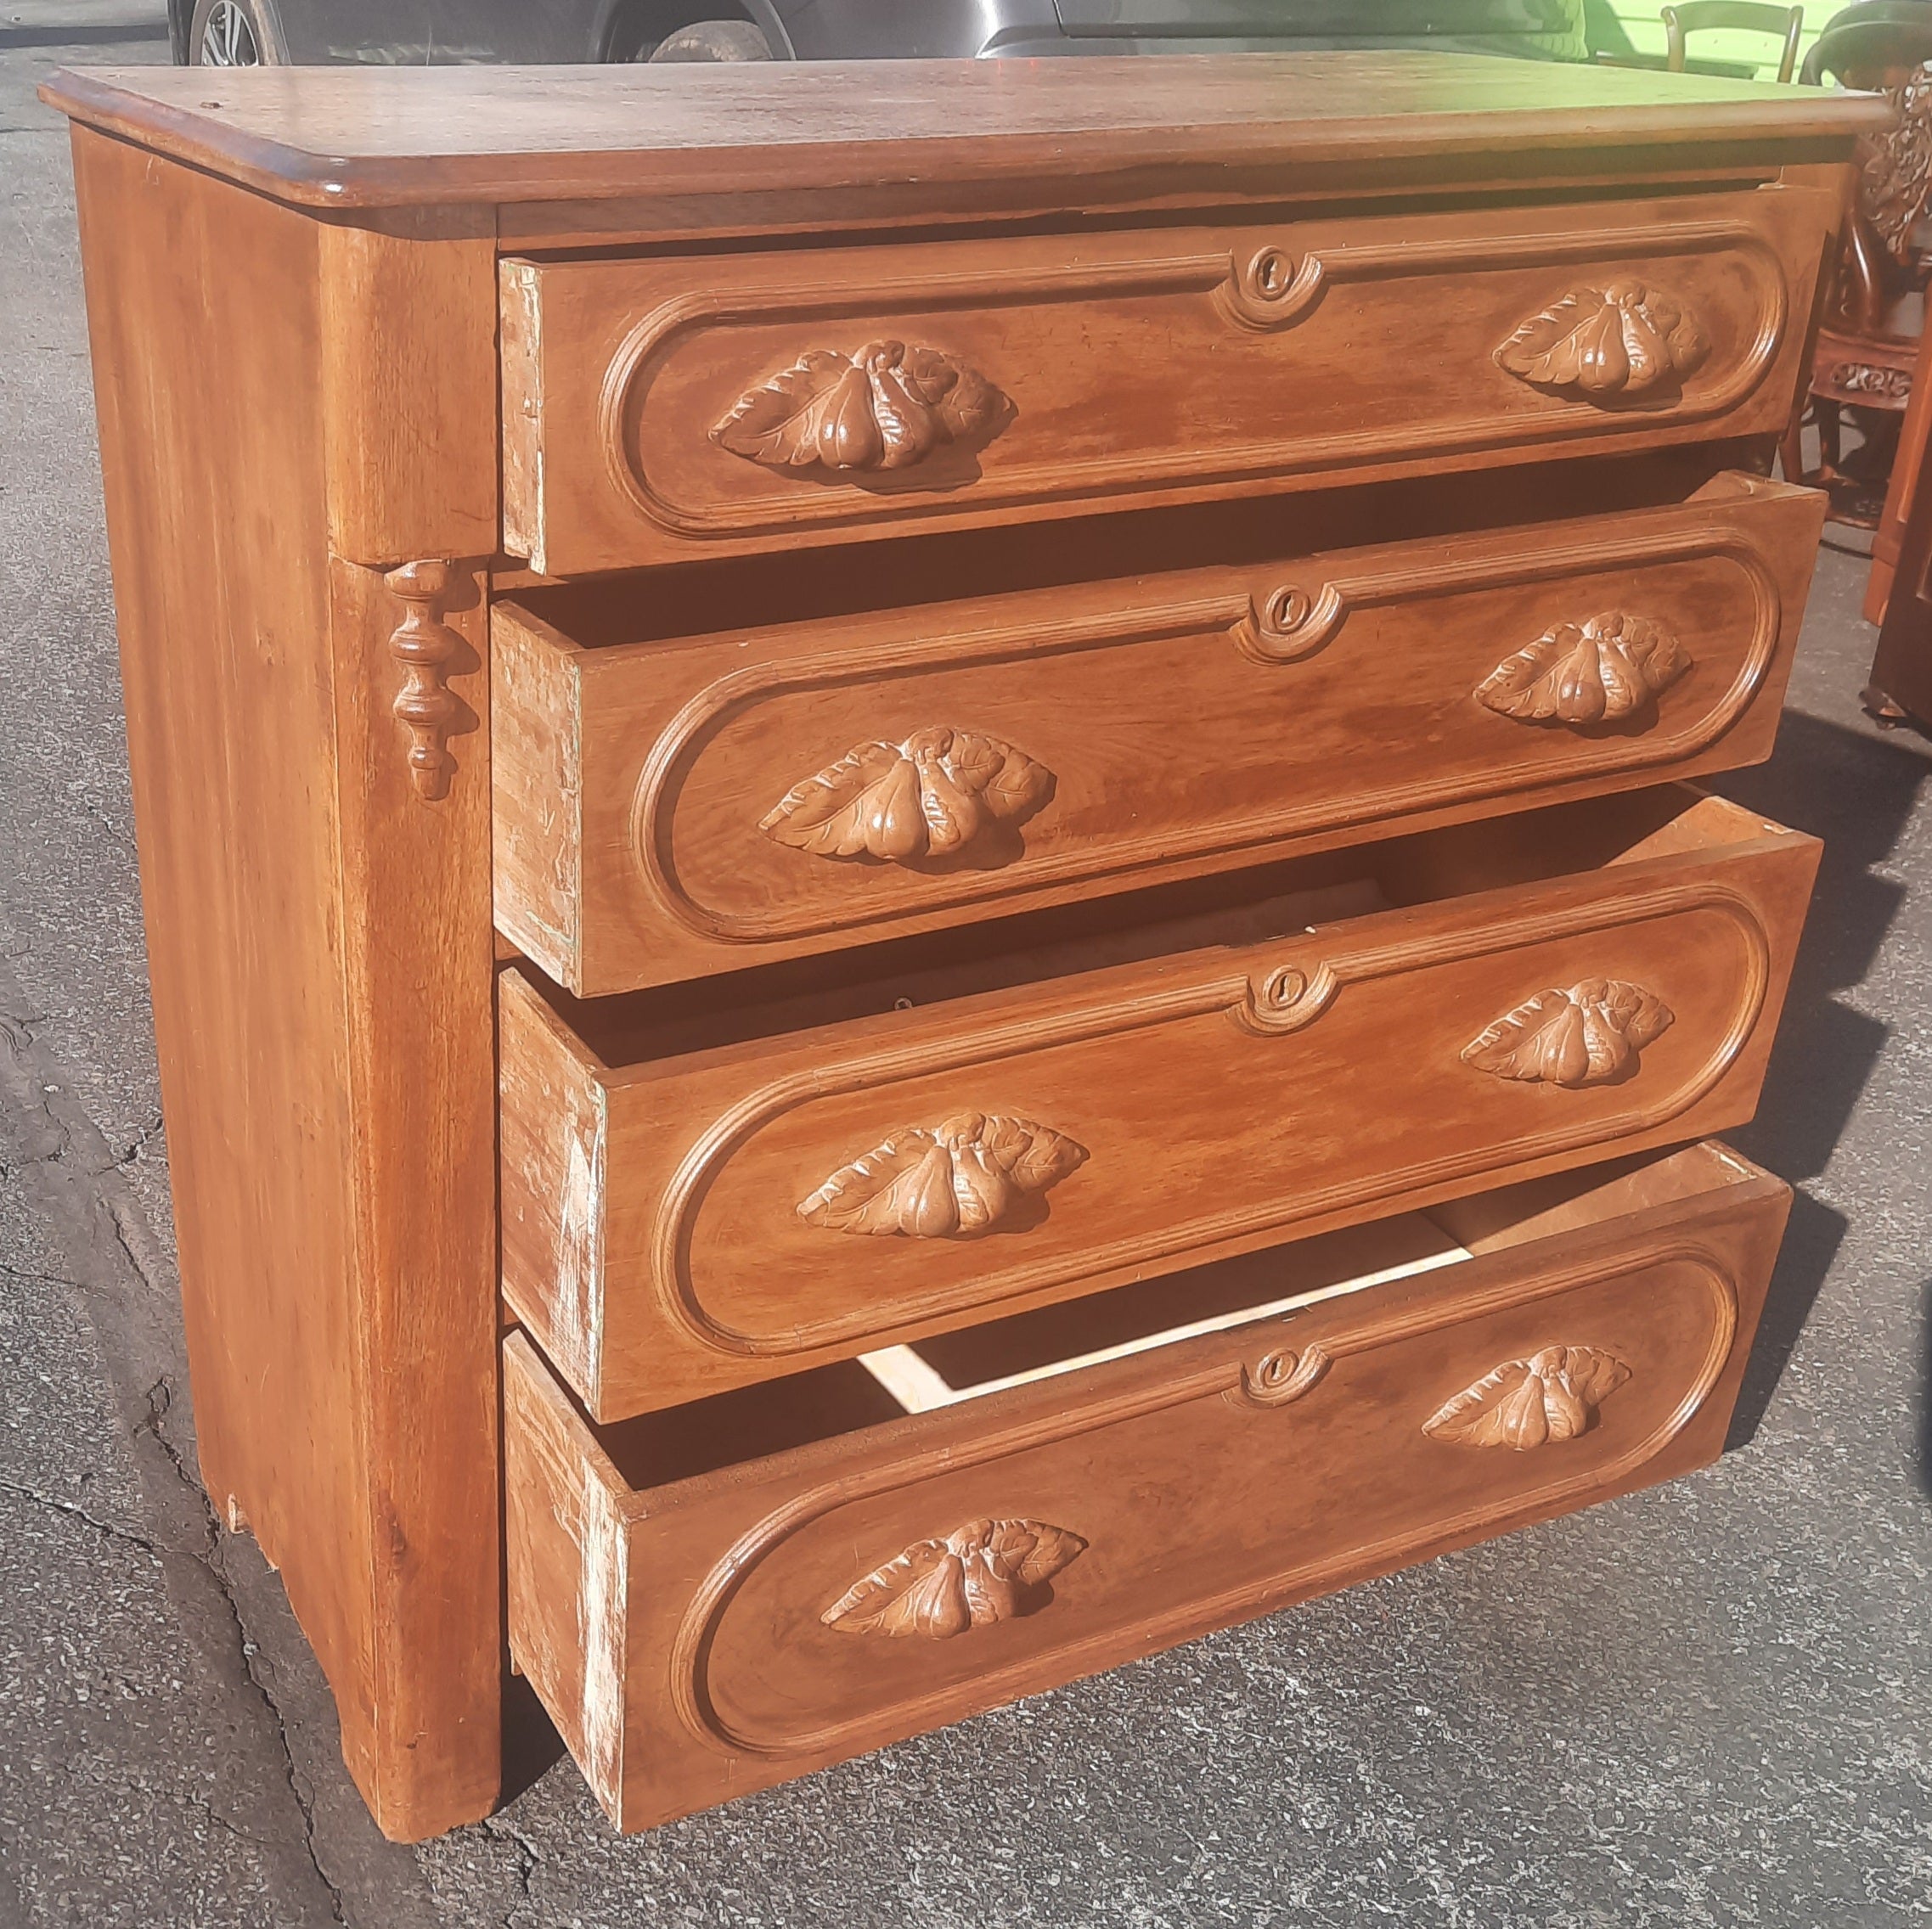 Fabulous American antique chest of drawers / dresser.
Space saving design and with ample storage options.
 Hand carved wood pulls. Solid walnut wood frame that is a perfect size for any space.
Overall good vintage condition and extremely sturdy.